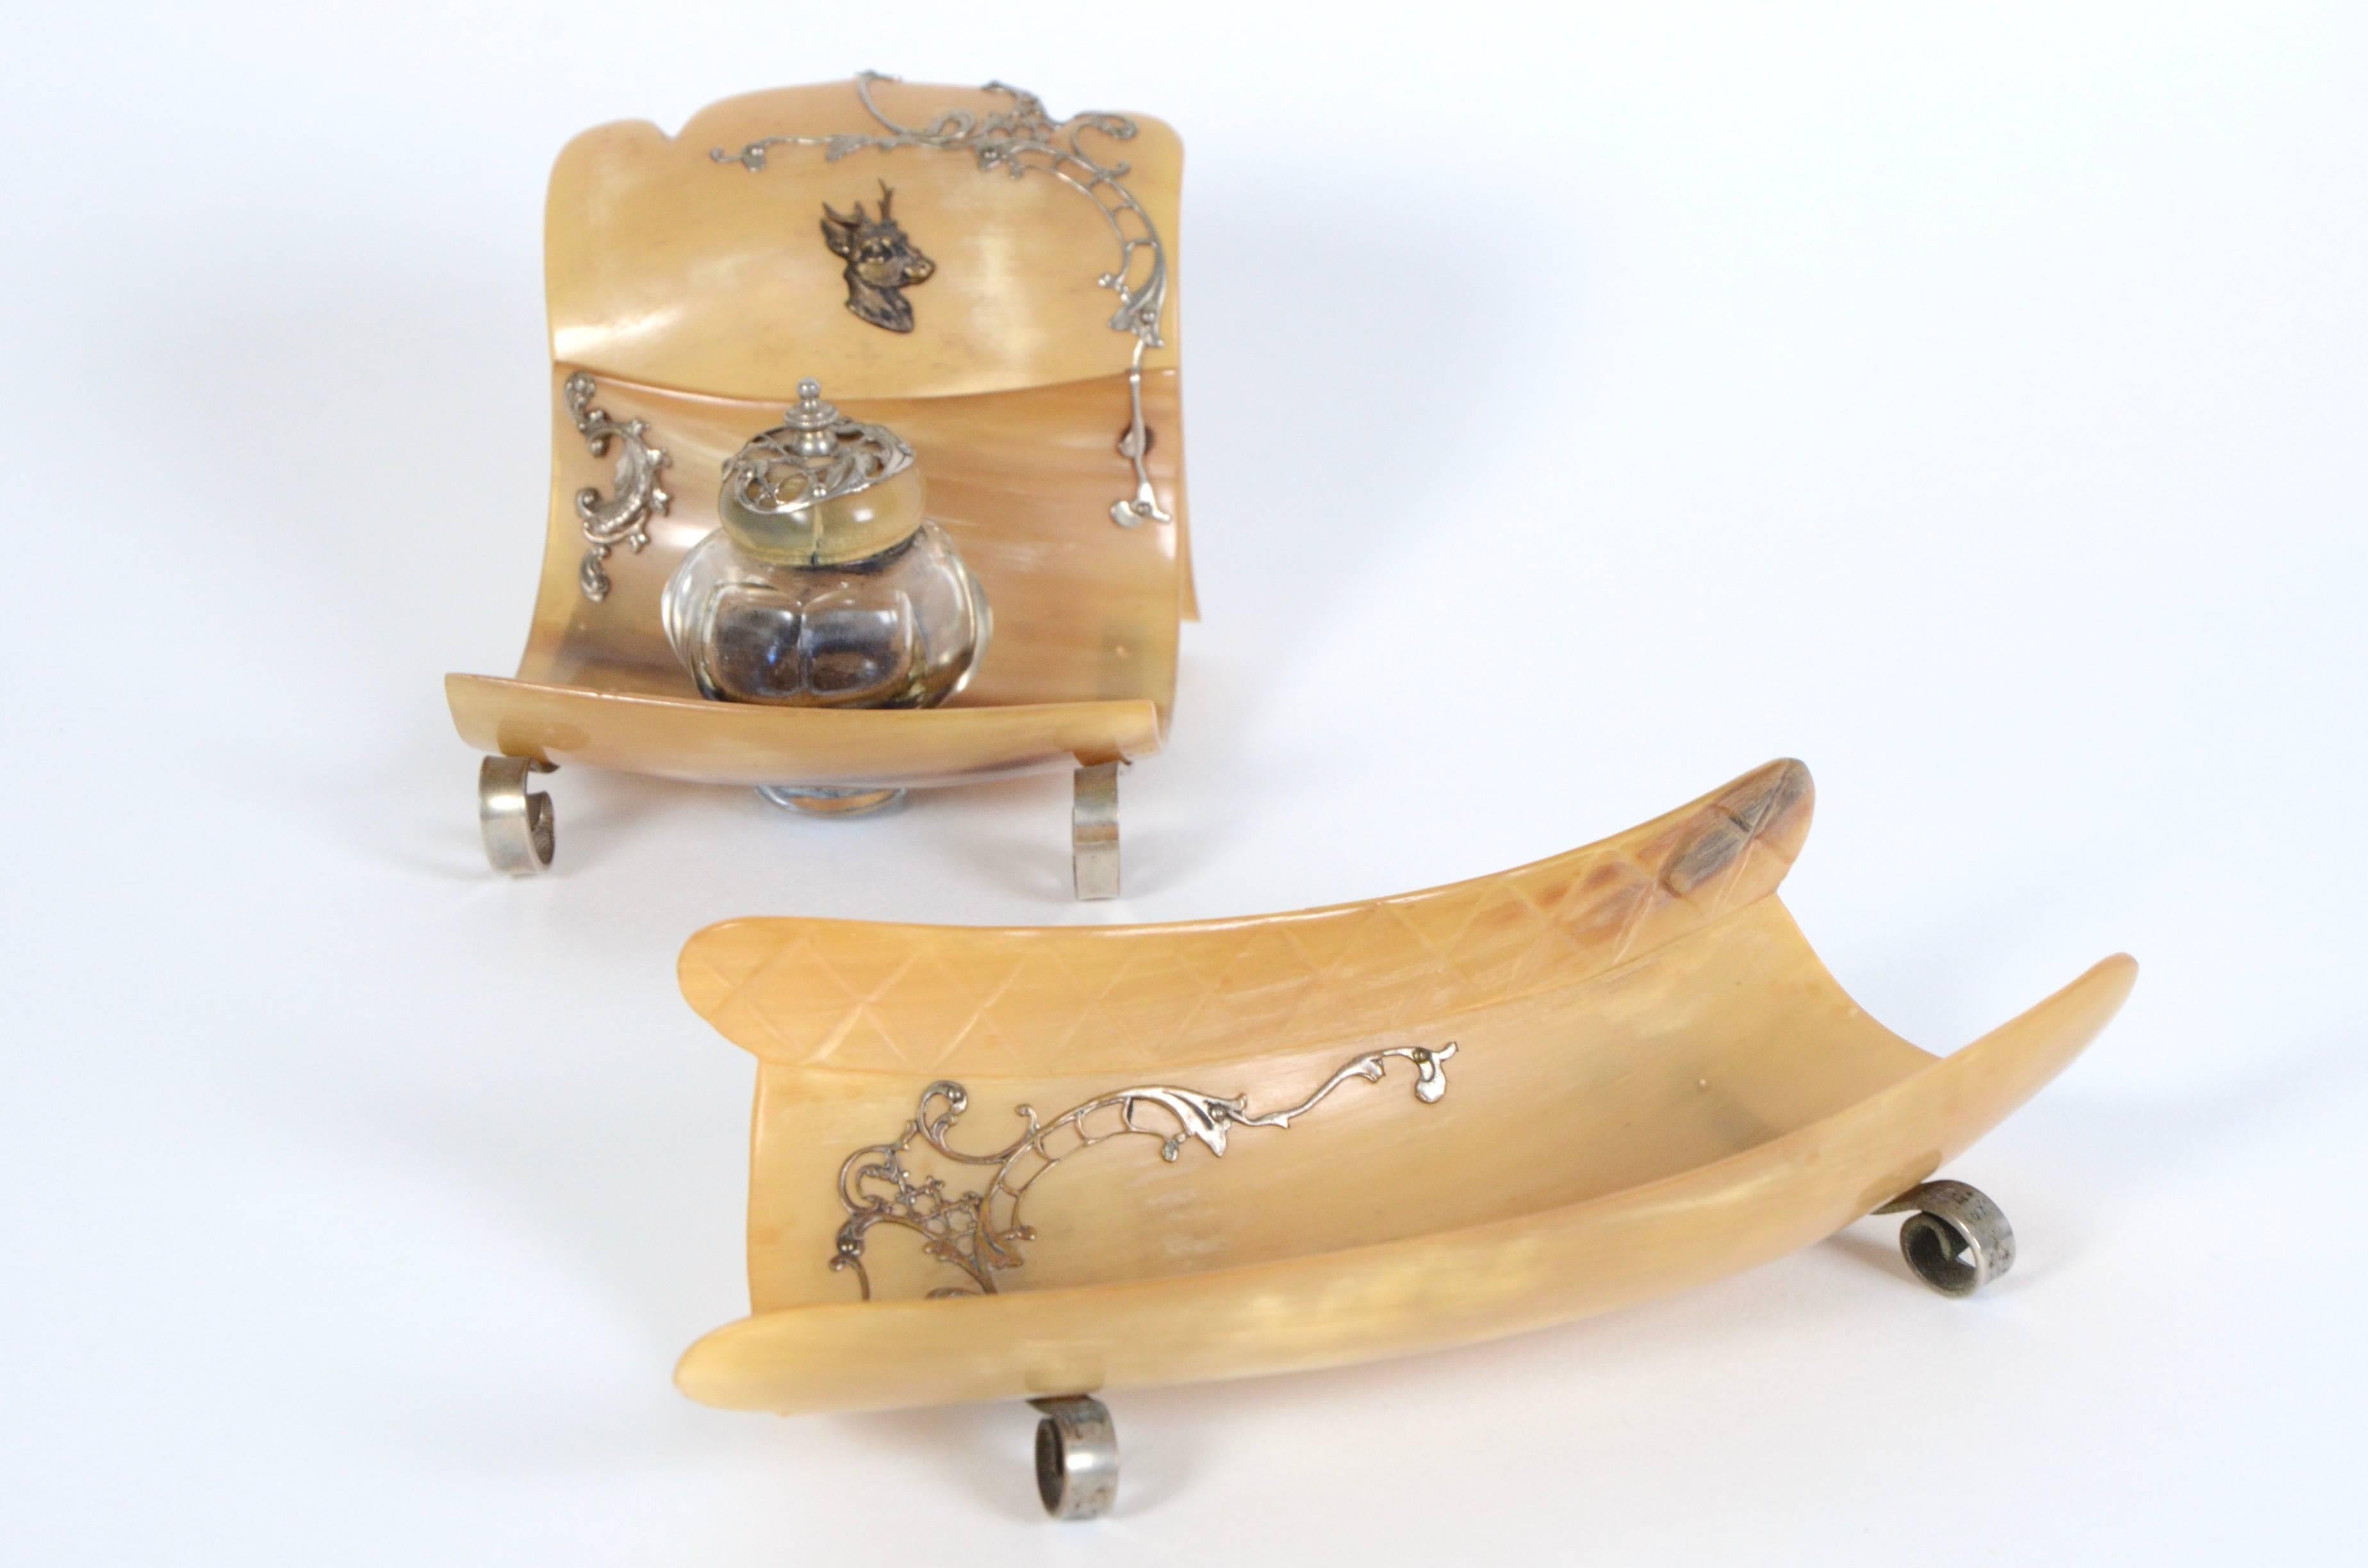 A 19th century continental horn desk set ornately decorated with silver. The small tray is 8 inches long, 3.25 inches deep and 1.75 inches high. The lidded glass inkwell is 4 inches wide, 5 inches deep and 3.25 inches high.